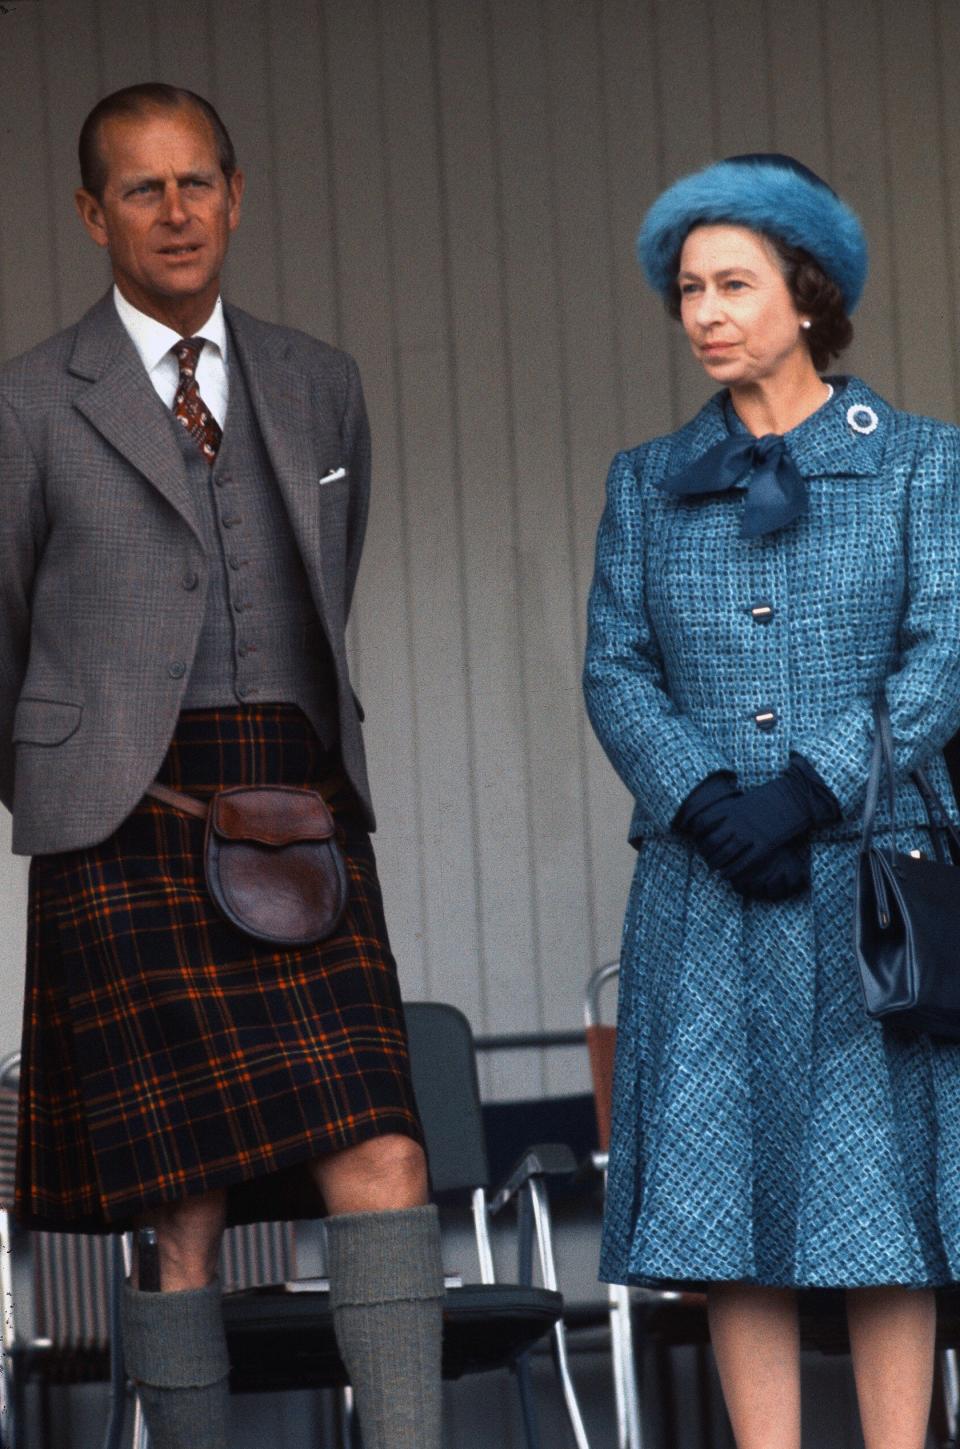 Prince Philip and Queen Elizabeth II, wearing a blue hat and coat dress, at the Braemar Highland Games in 1975.